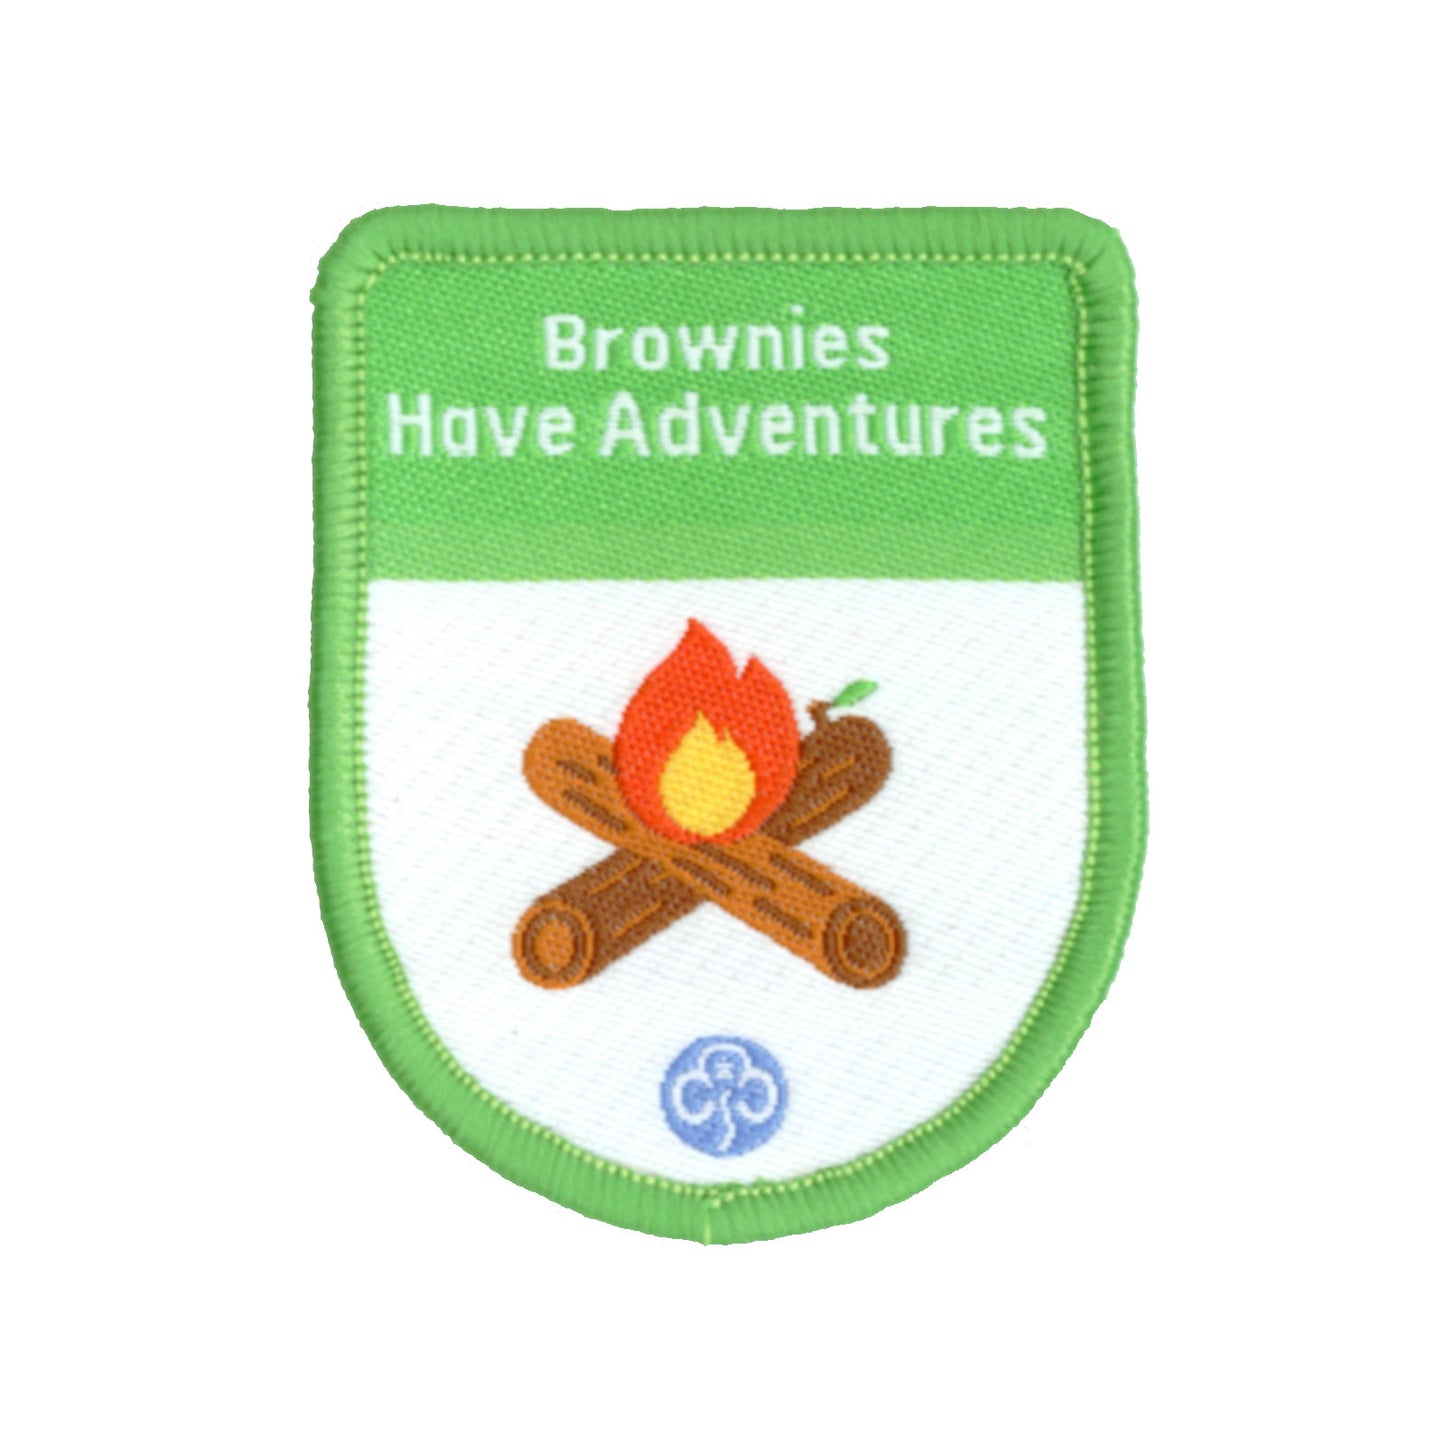 Brownies Have Adventures Theme Award Woven Badge